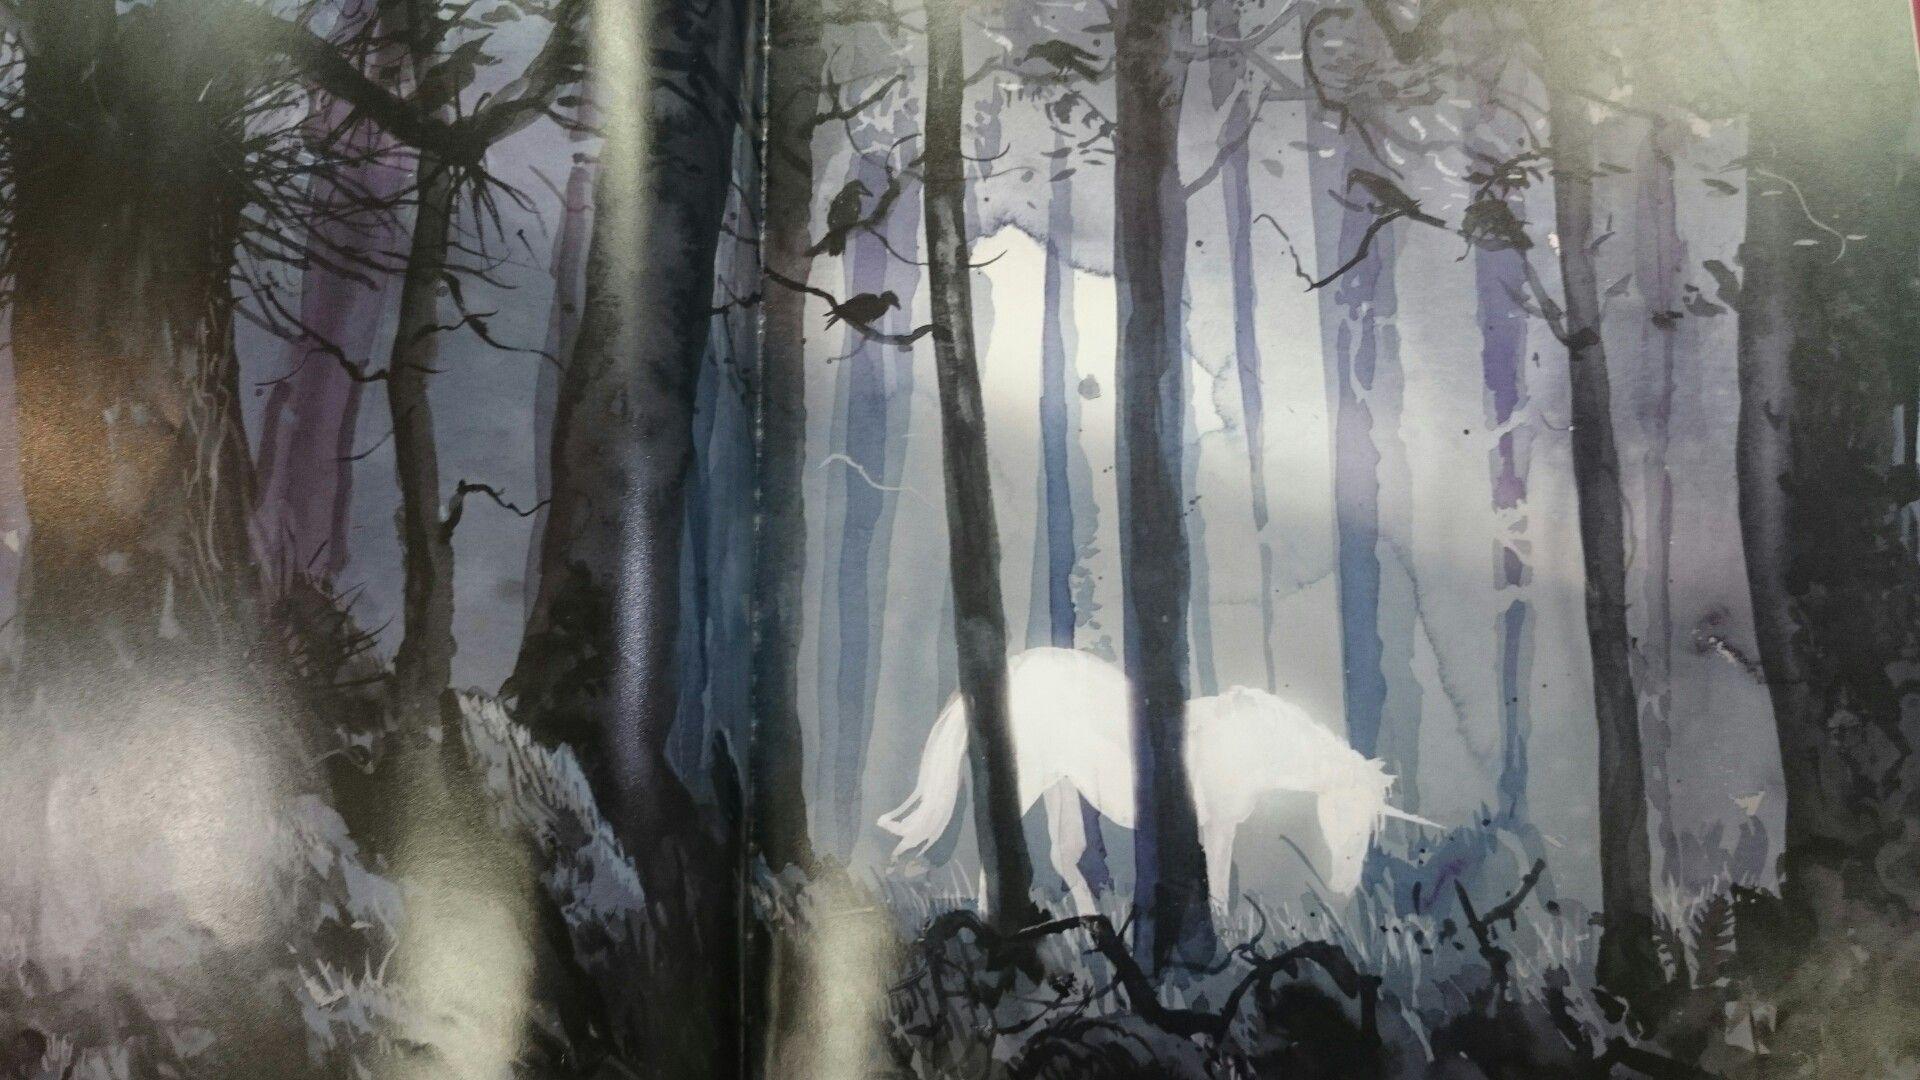 Jim Kay's beautiful illustration on the forbidden forest. Harry